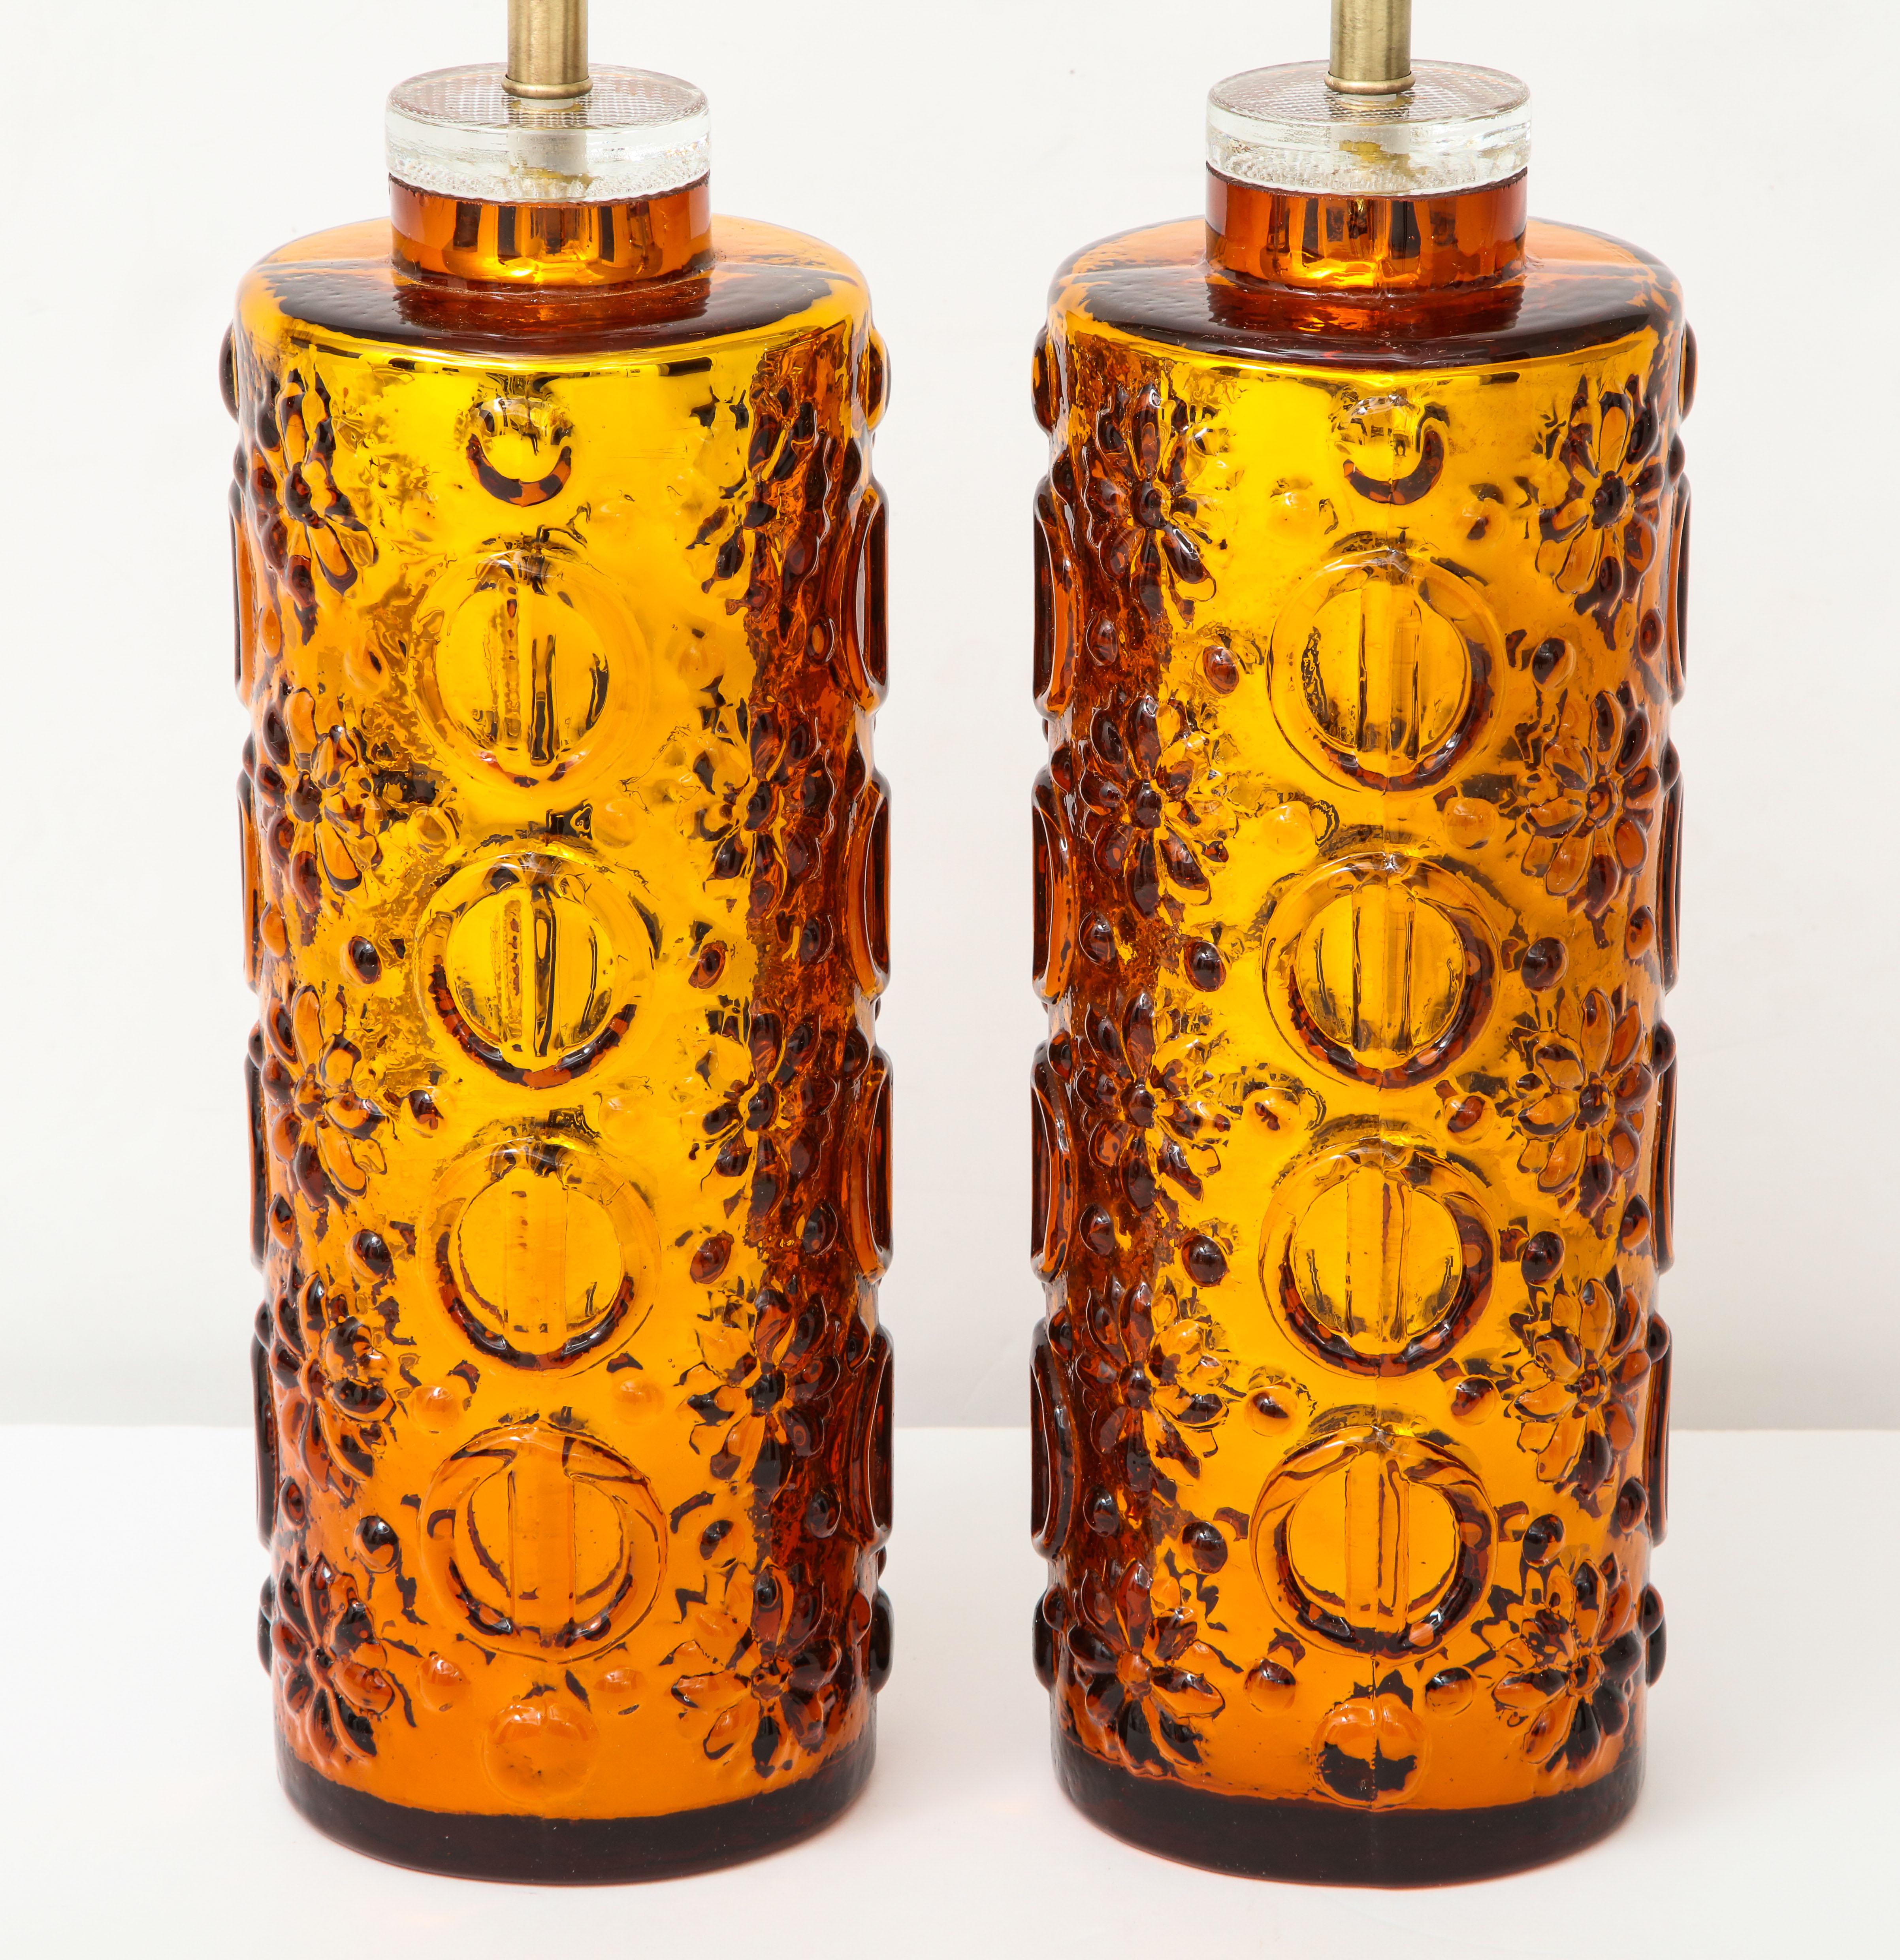 20th Century Johansfors Graphic Patterned Gold Glass Lamps For Sale